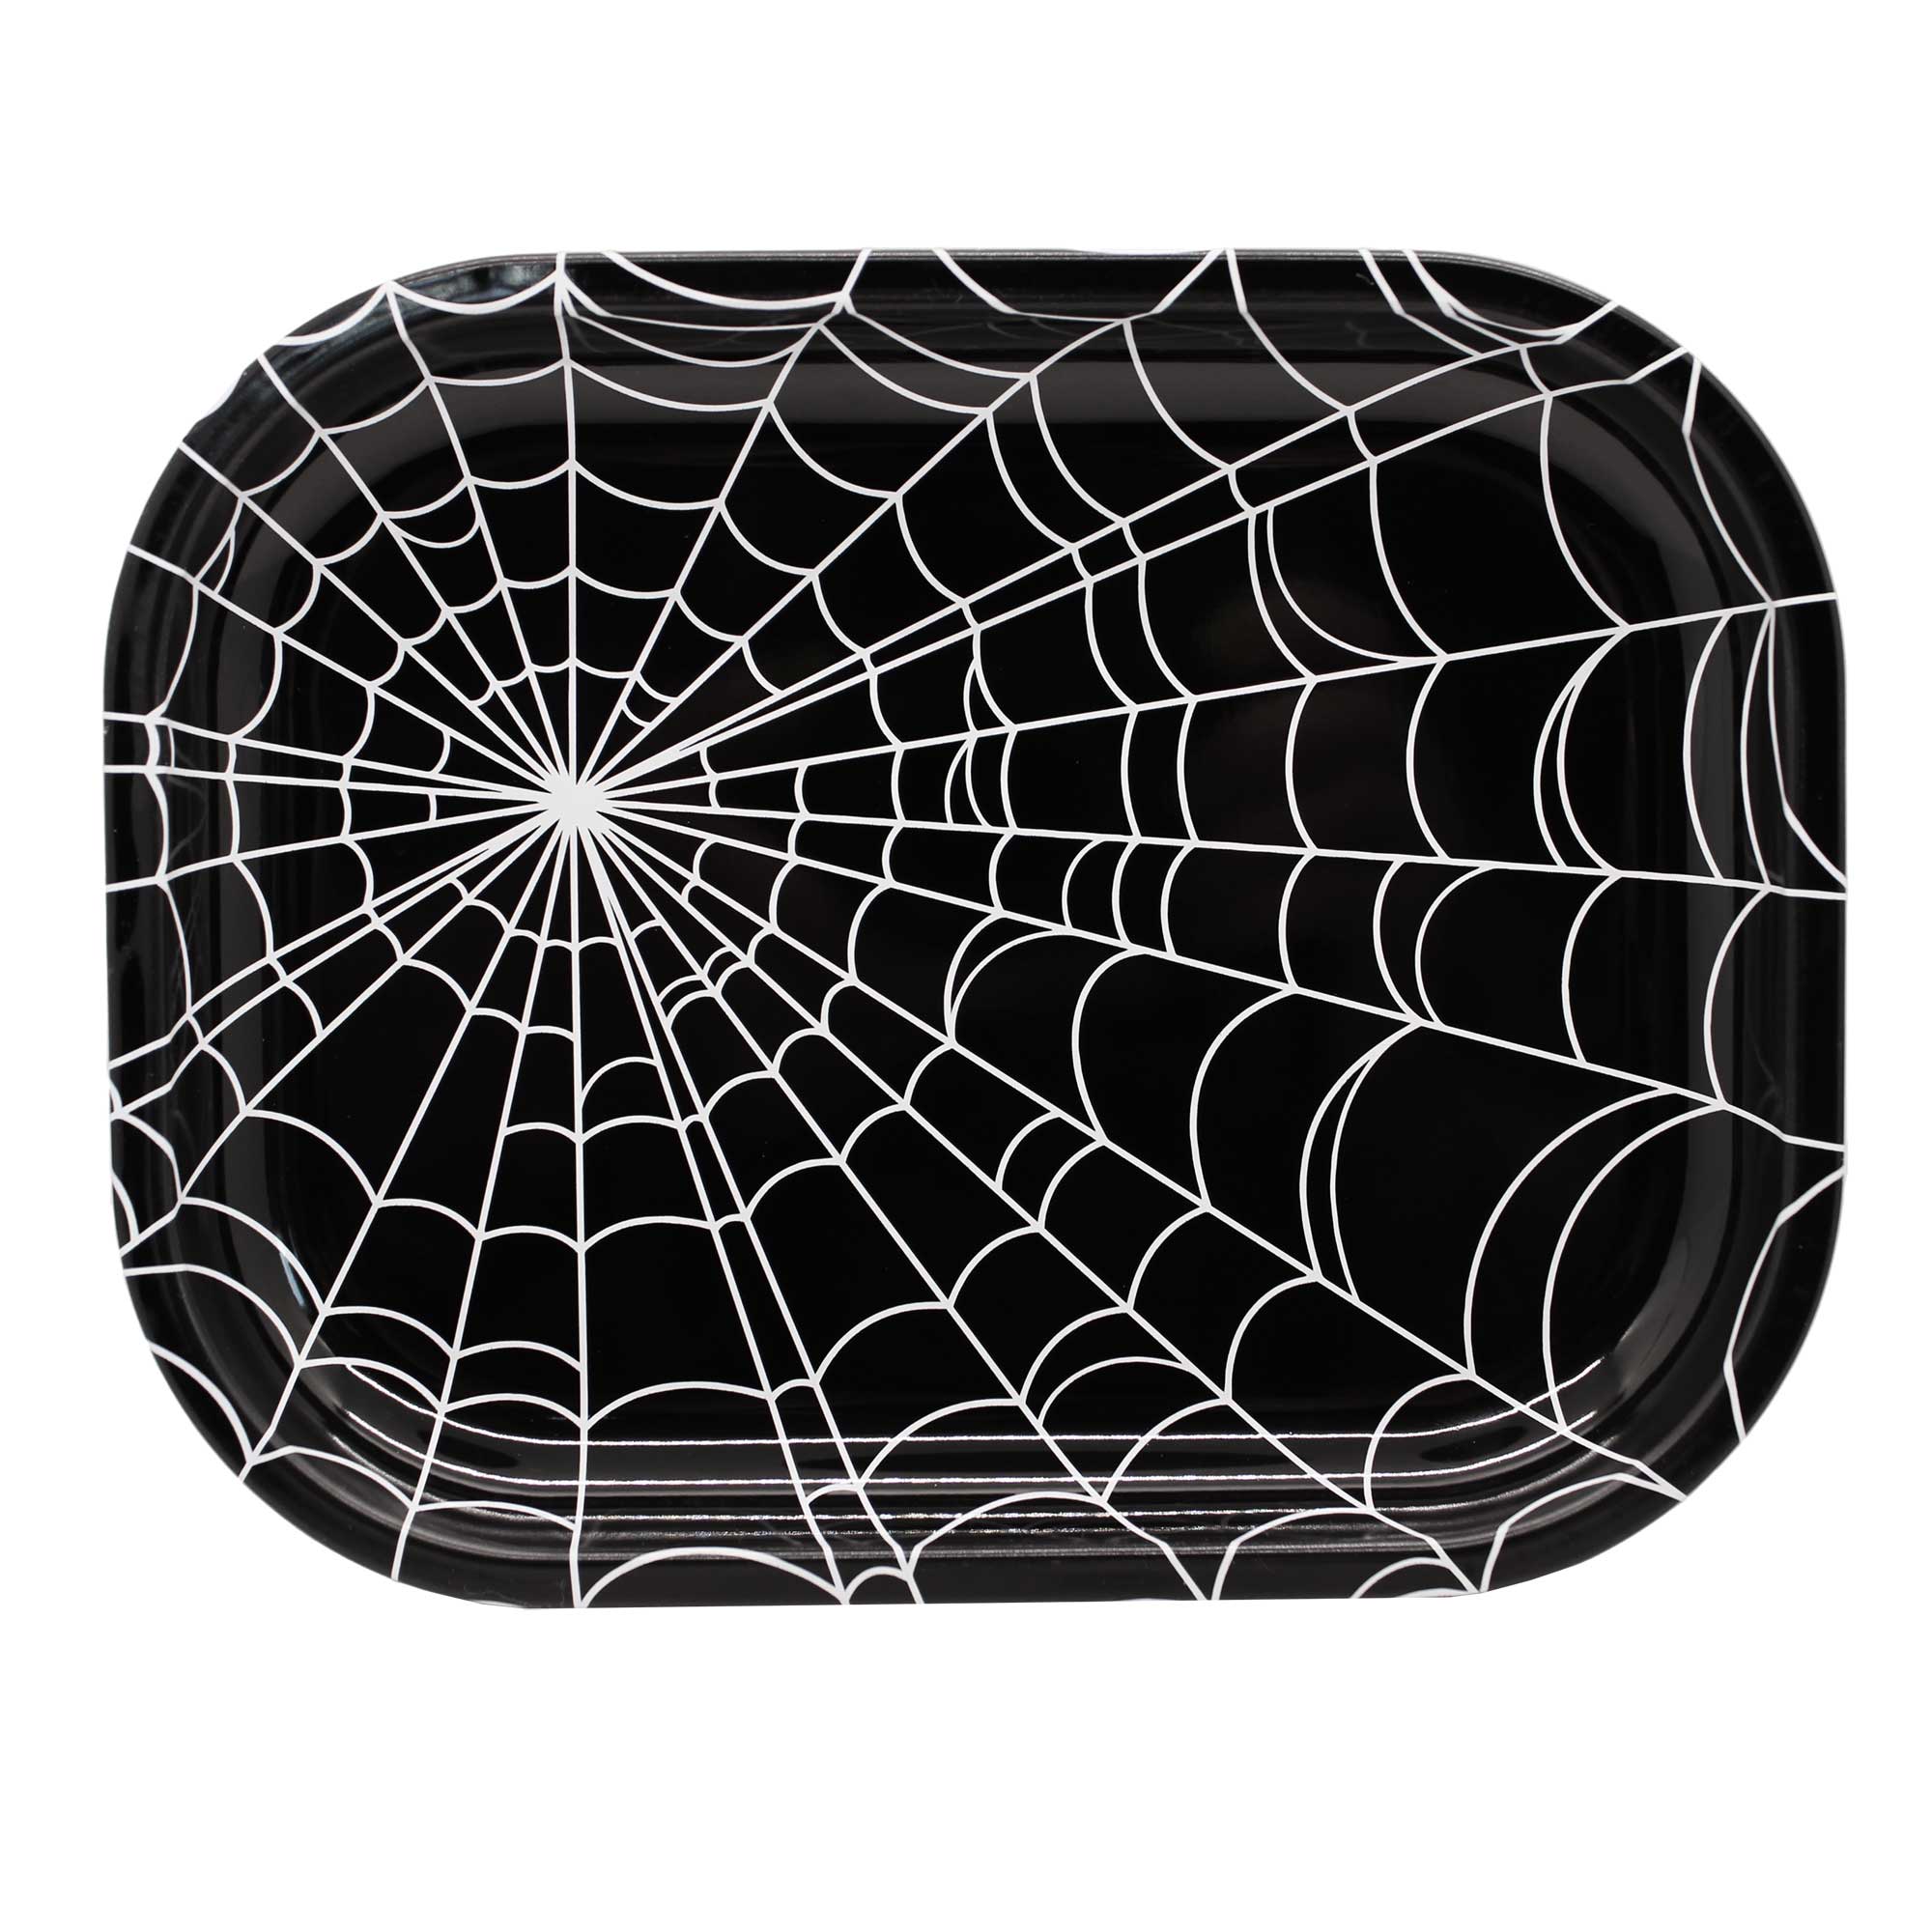 Rectangular tin tray with a wide lip. It has an all-over white spiderweb design on a black background. Shown from above